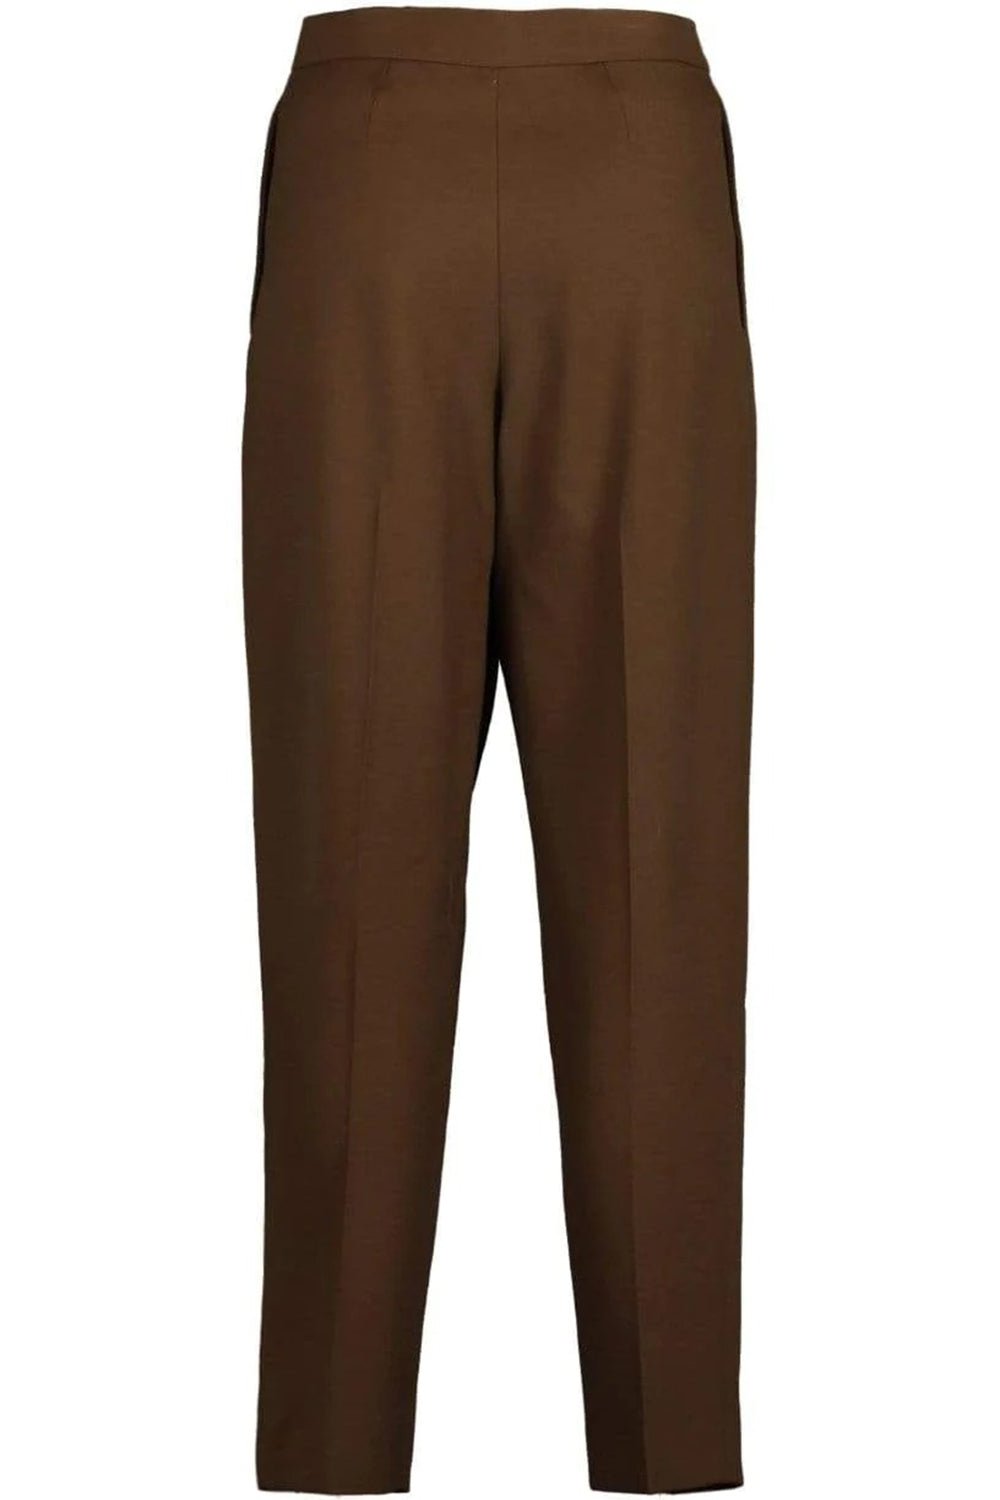 CHLOÉ-Front Pleated Wide Leg Pant-BROWN